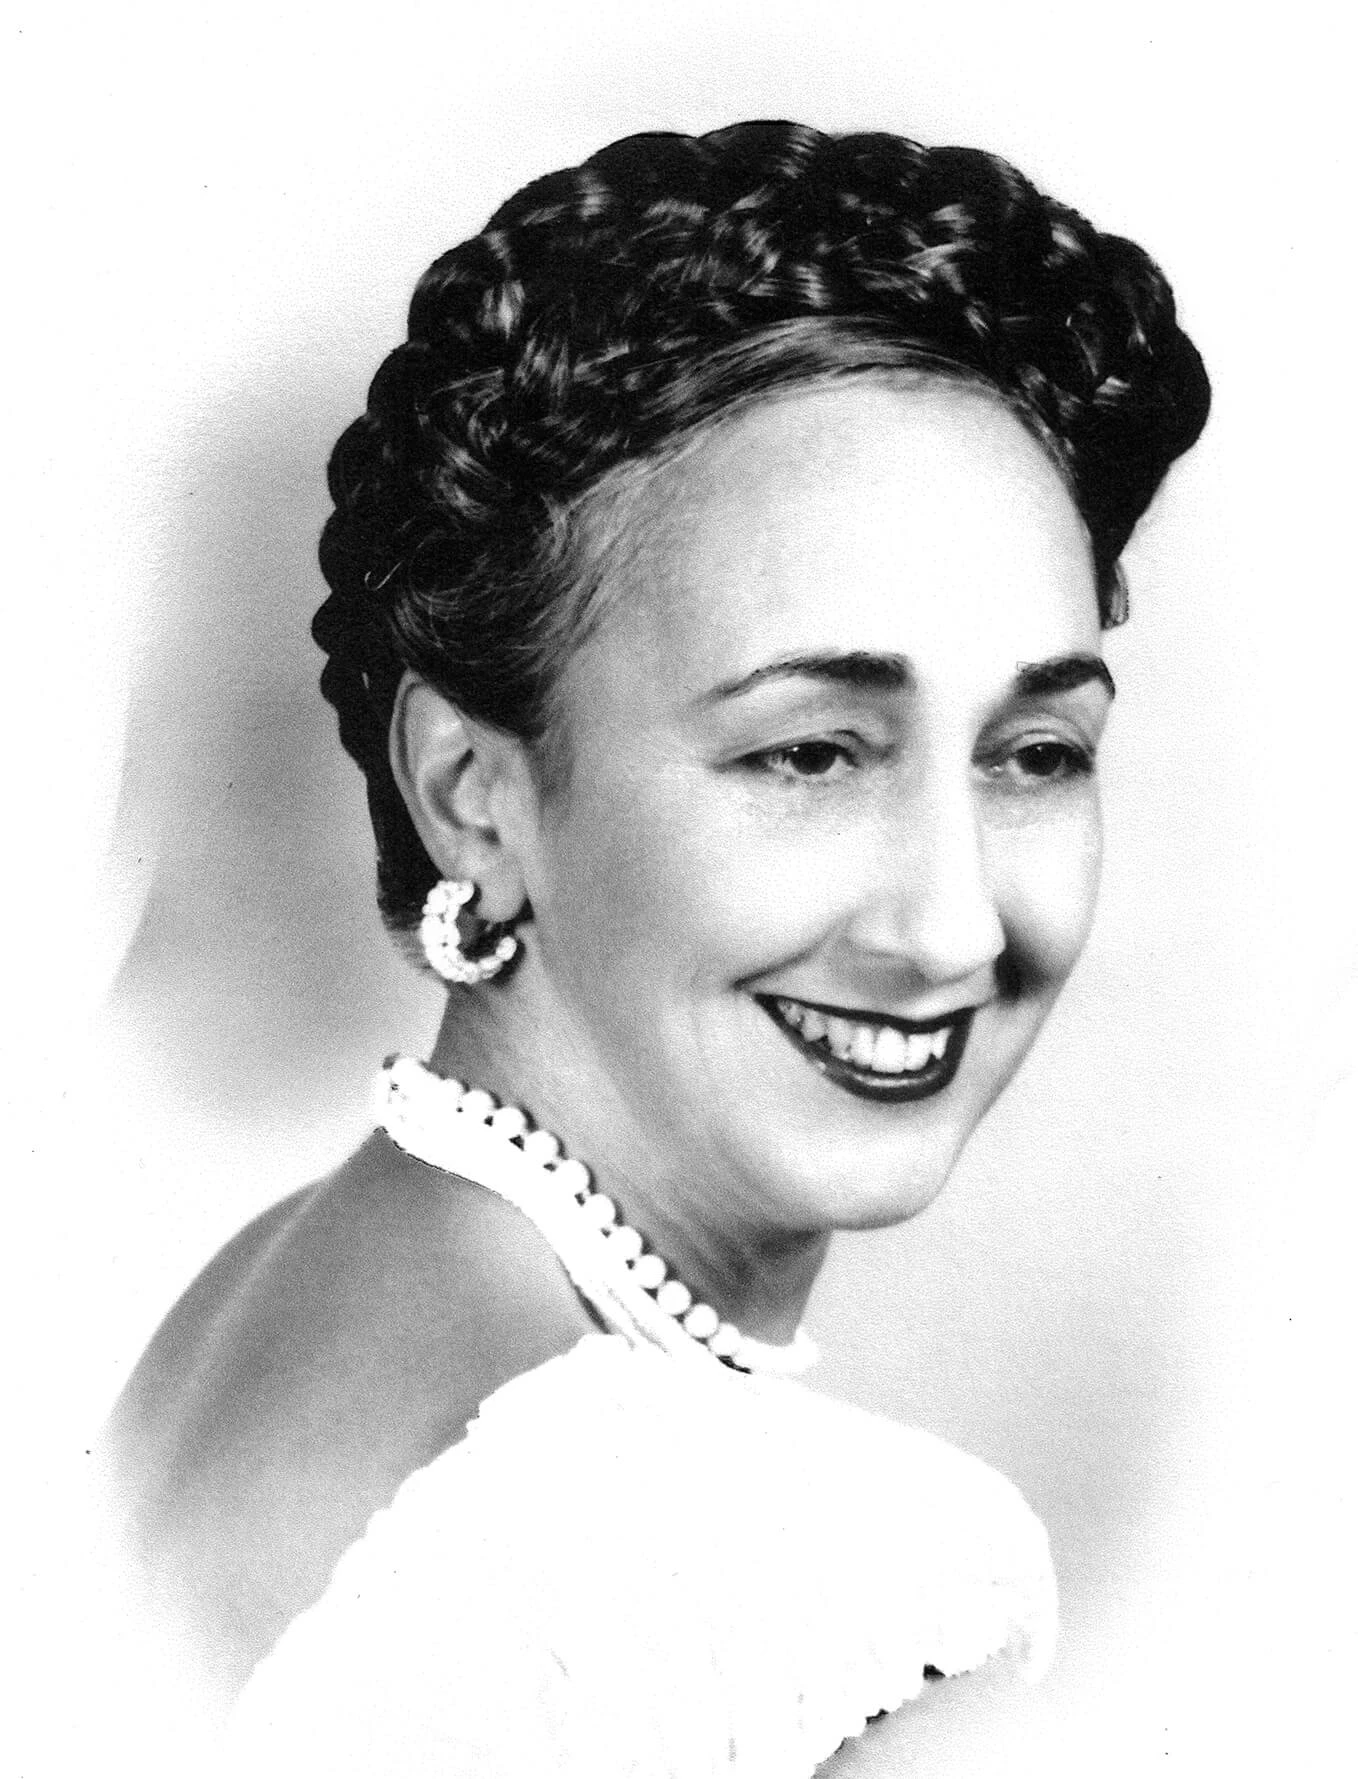 Lue Brown is wearing a white dress and pearls.  She has large earrings.  She is wearing red lipstick and she is smiling. Lue has dark eyes and dark hair. Her hair is braided and fashioned into an up-do on top of her head. She is facing the right and looking slightly over her shoulder.